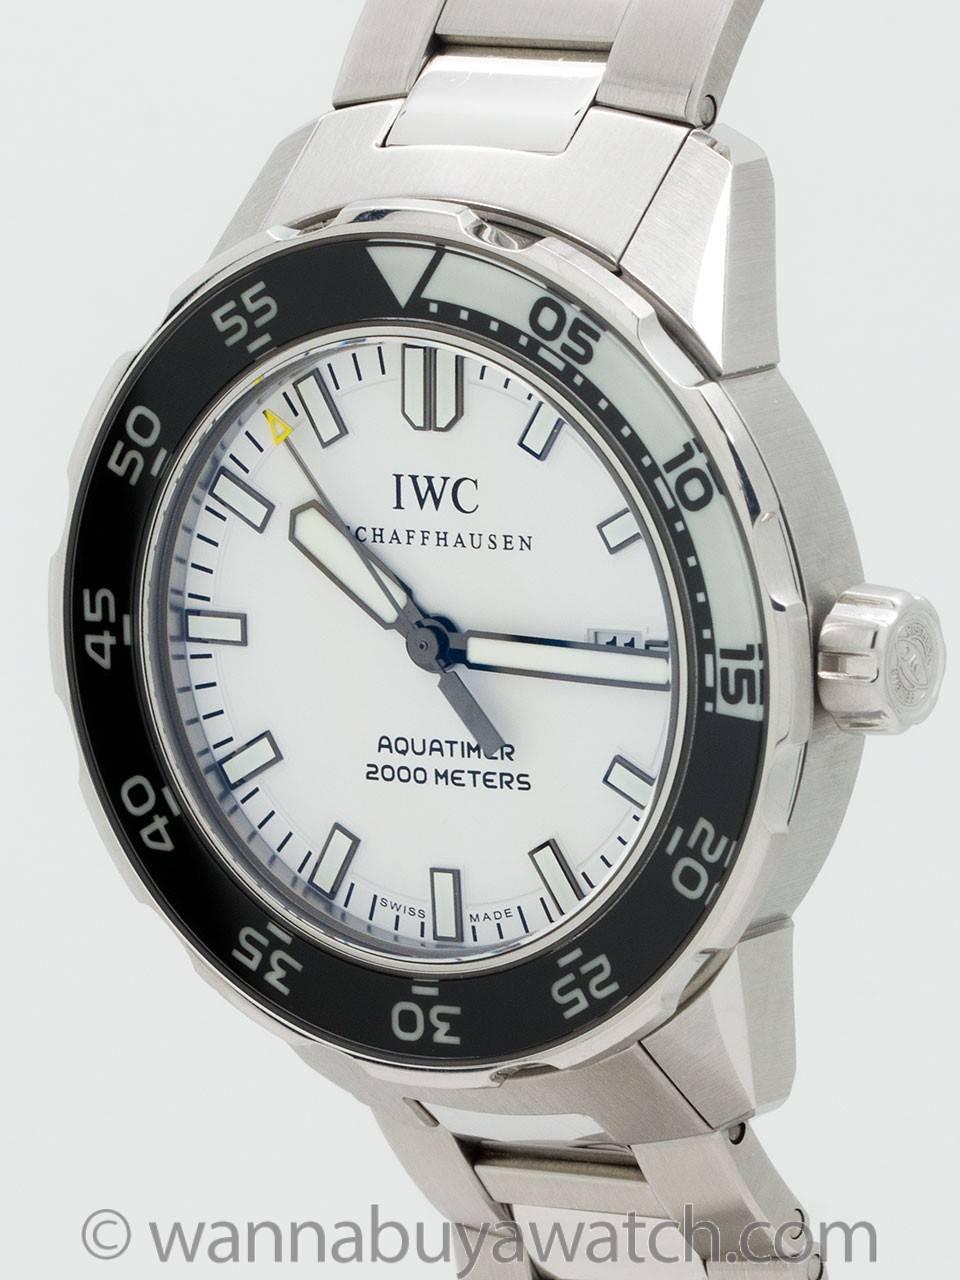 IWC Aquatimer 2000 Meters ref 356805 circa 2010s. 44 mm stainless steel case with rotating black and white bezel. Sapphire crystal and signed crown. Bright white dial with large luminous indexes and hands. Powered by automatic winding calibre 30110